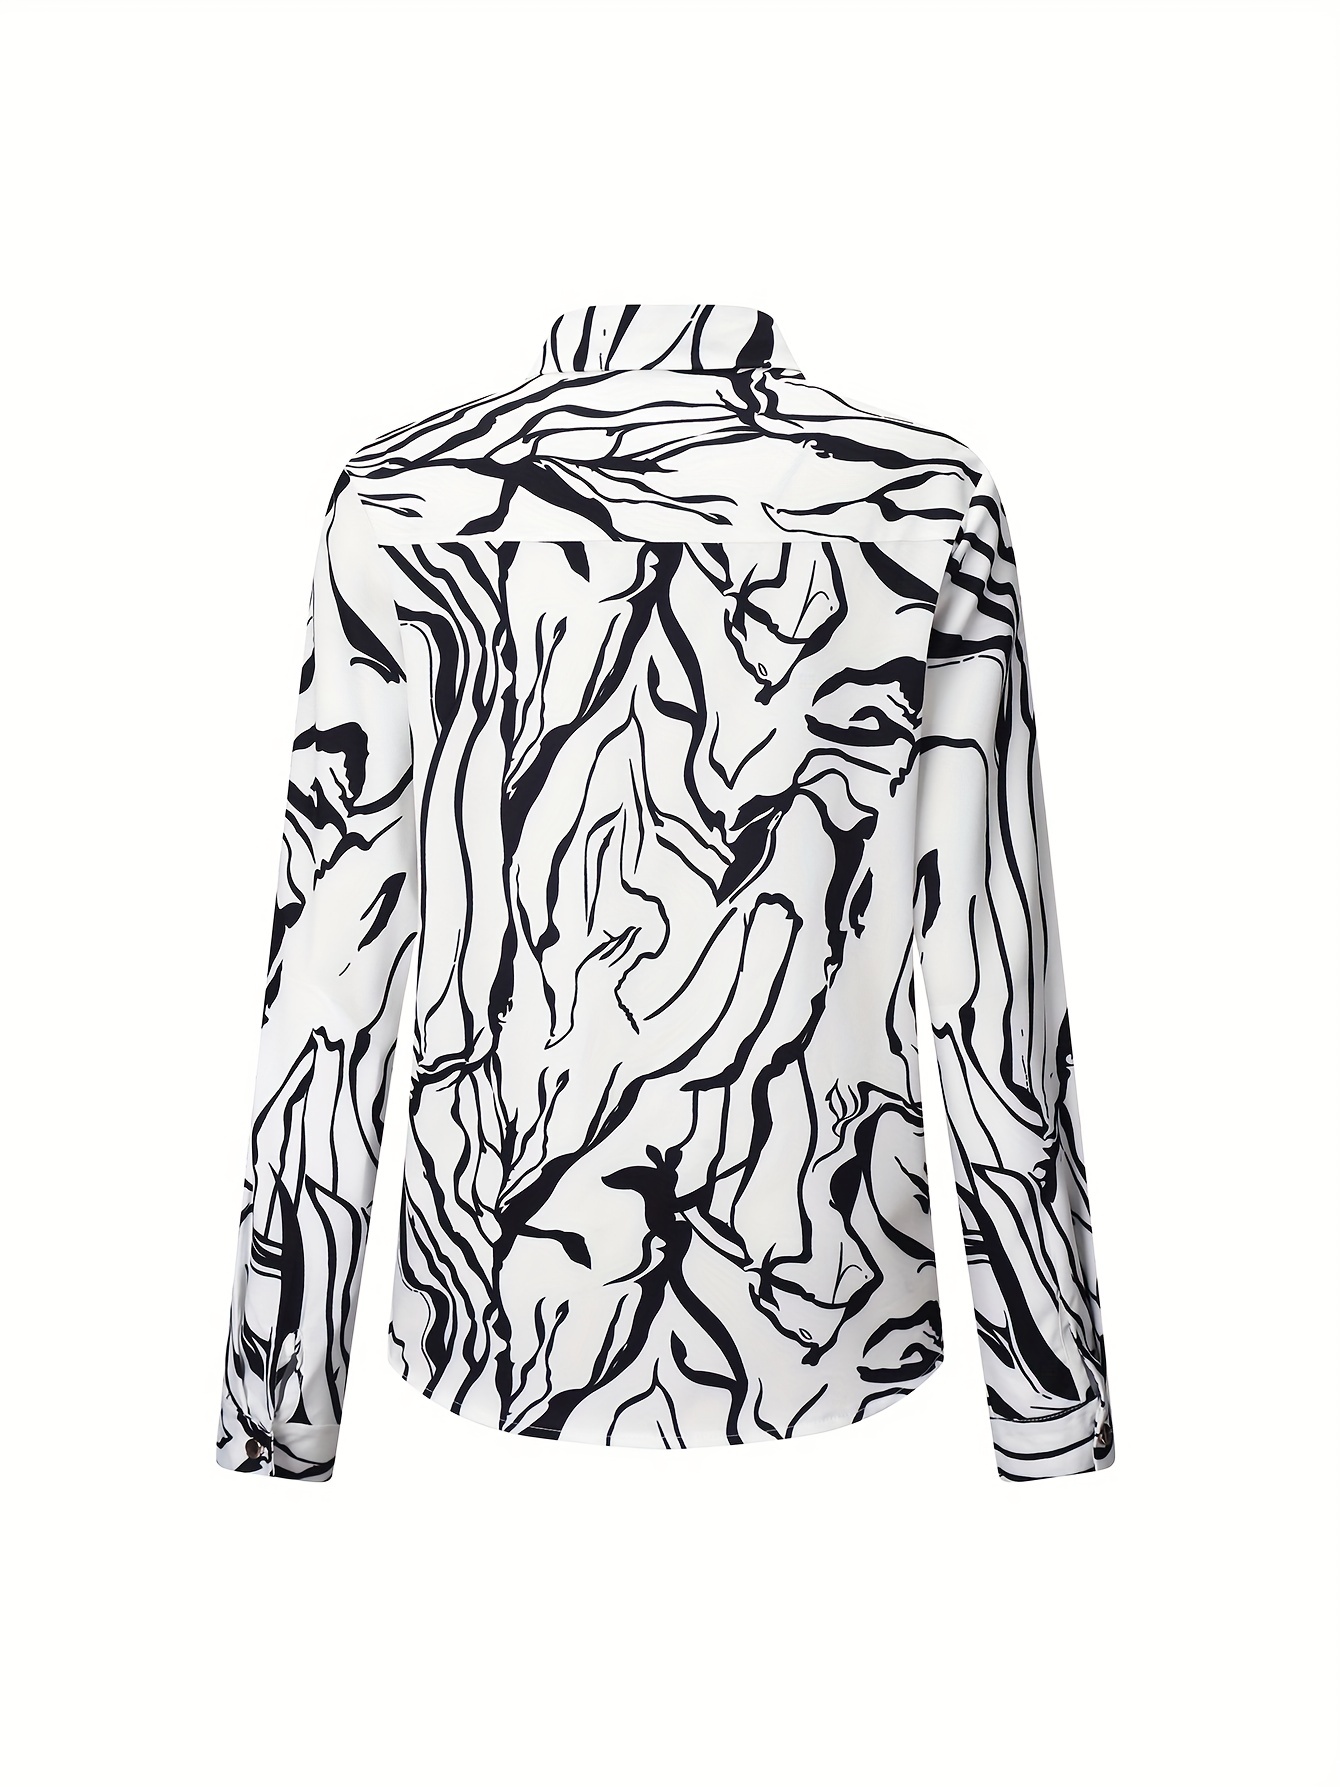 All Over Print Collar Shirt, Casual Long Sleeve Shirt For Spring